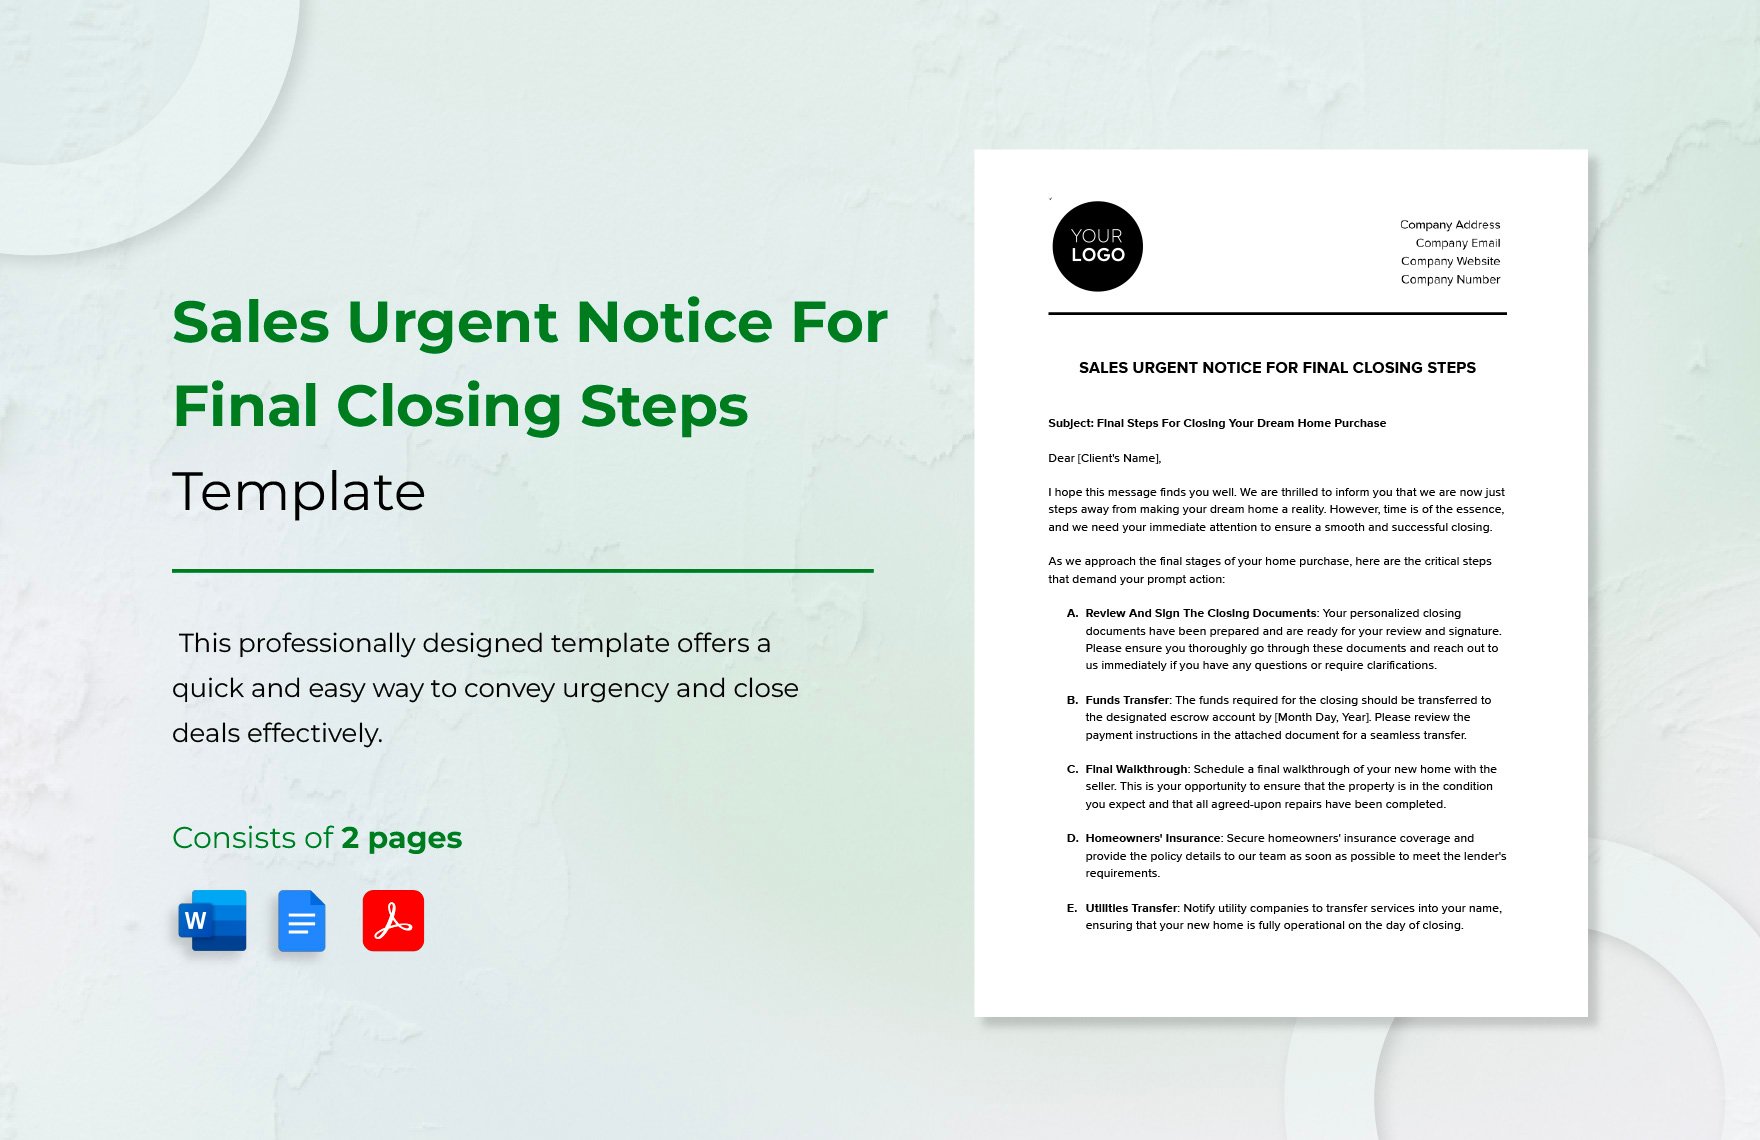 Sales Urgent Notice for Final Closing Steps Template in Word, Google Docs, PDF